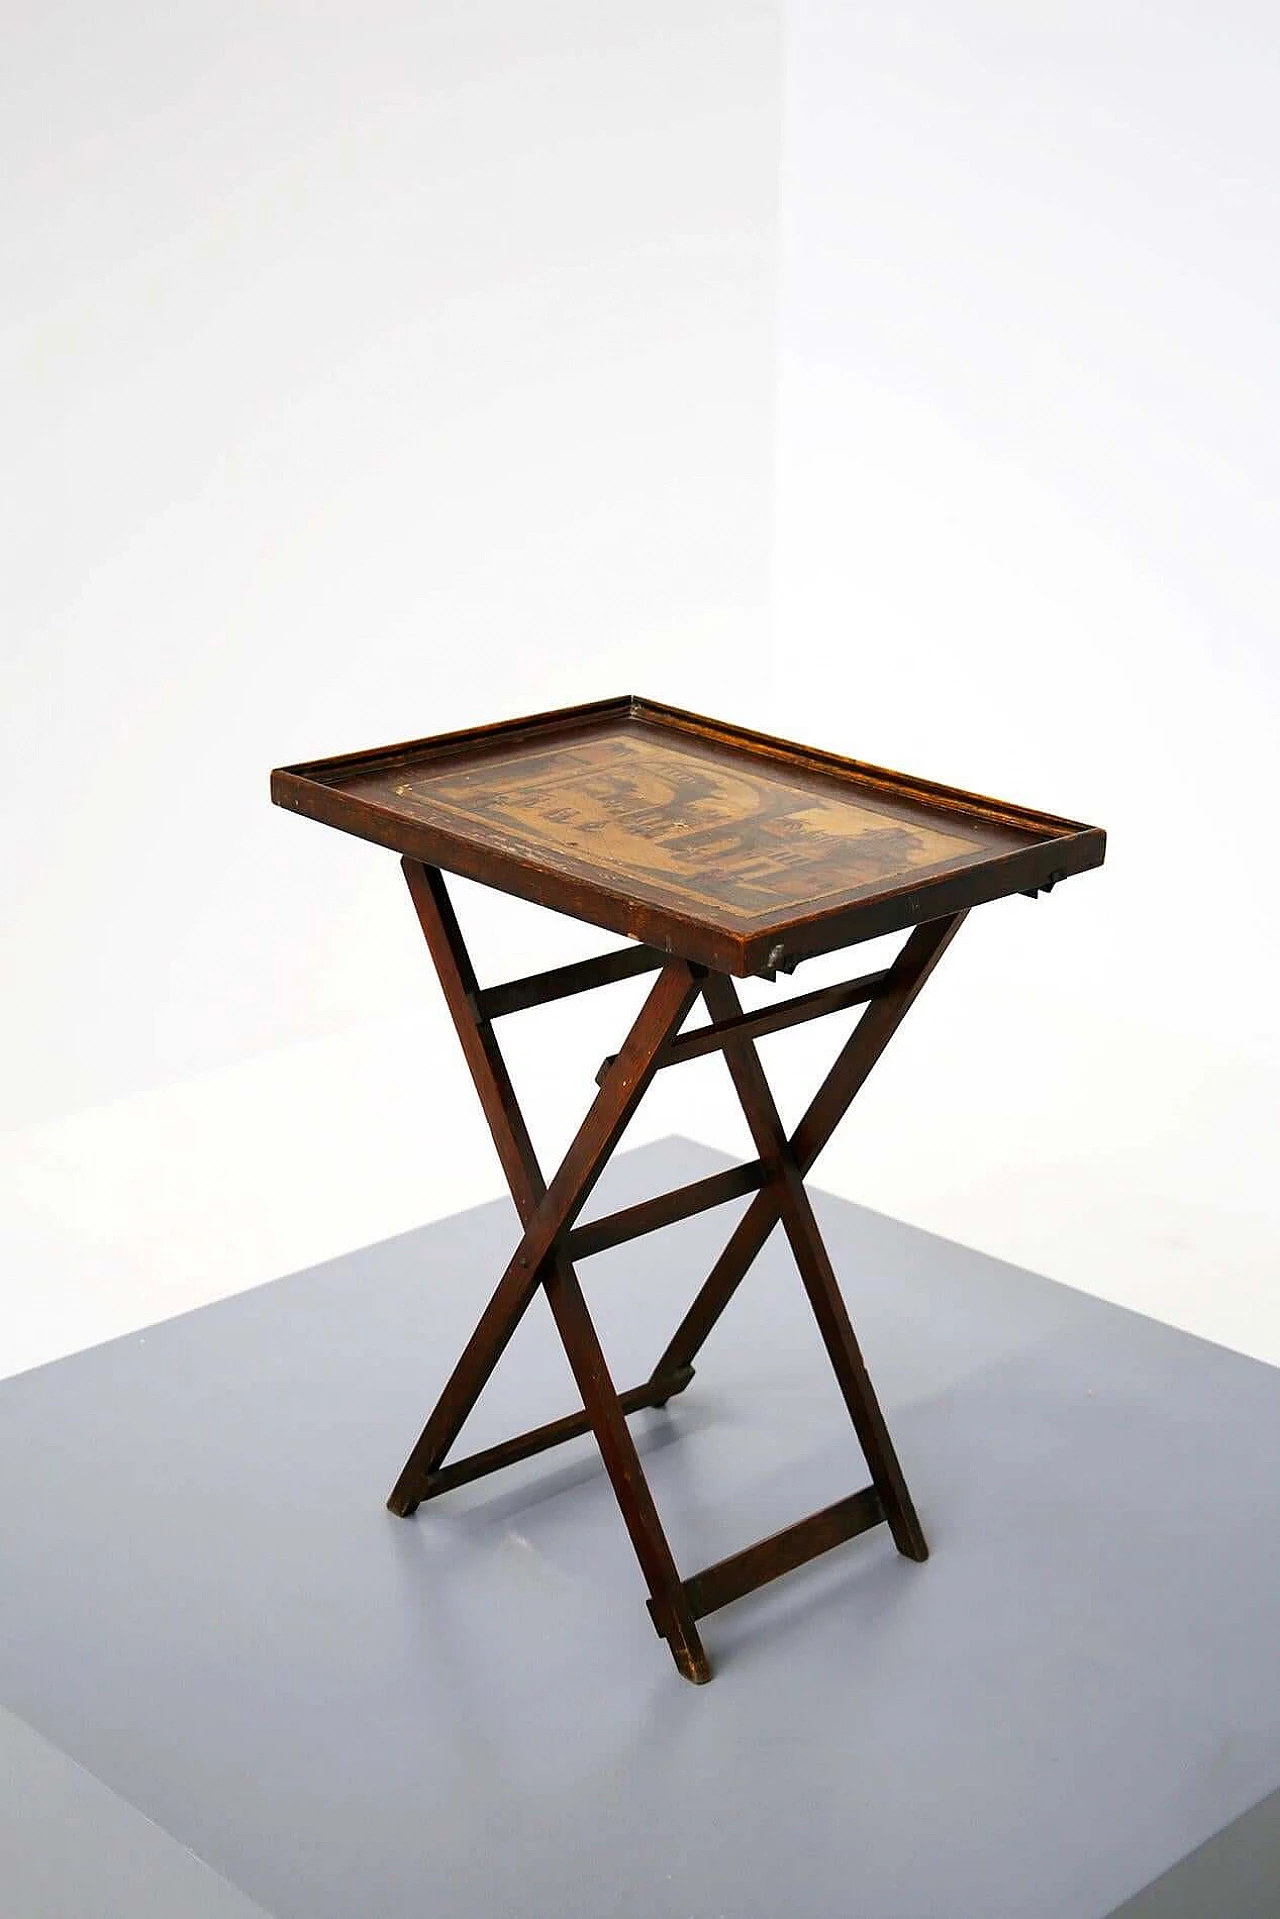 Chinese folding wooden coffee table with decorated top, 19th century 1412607